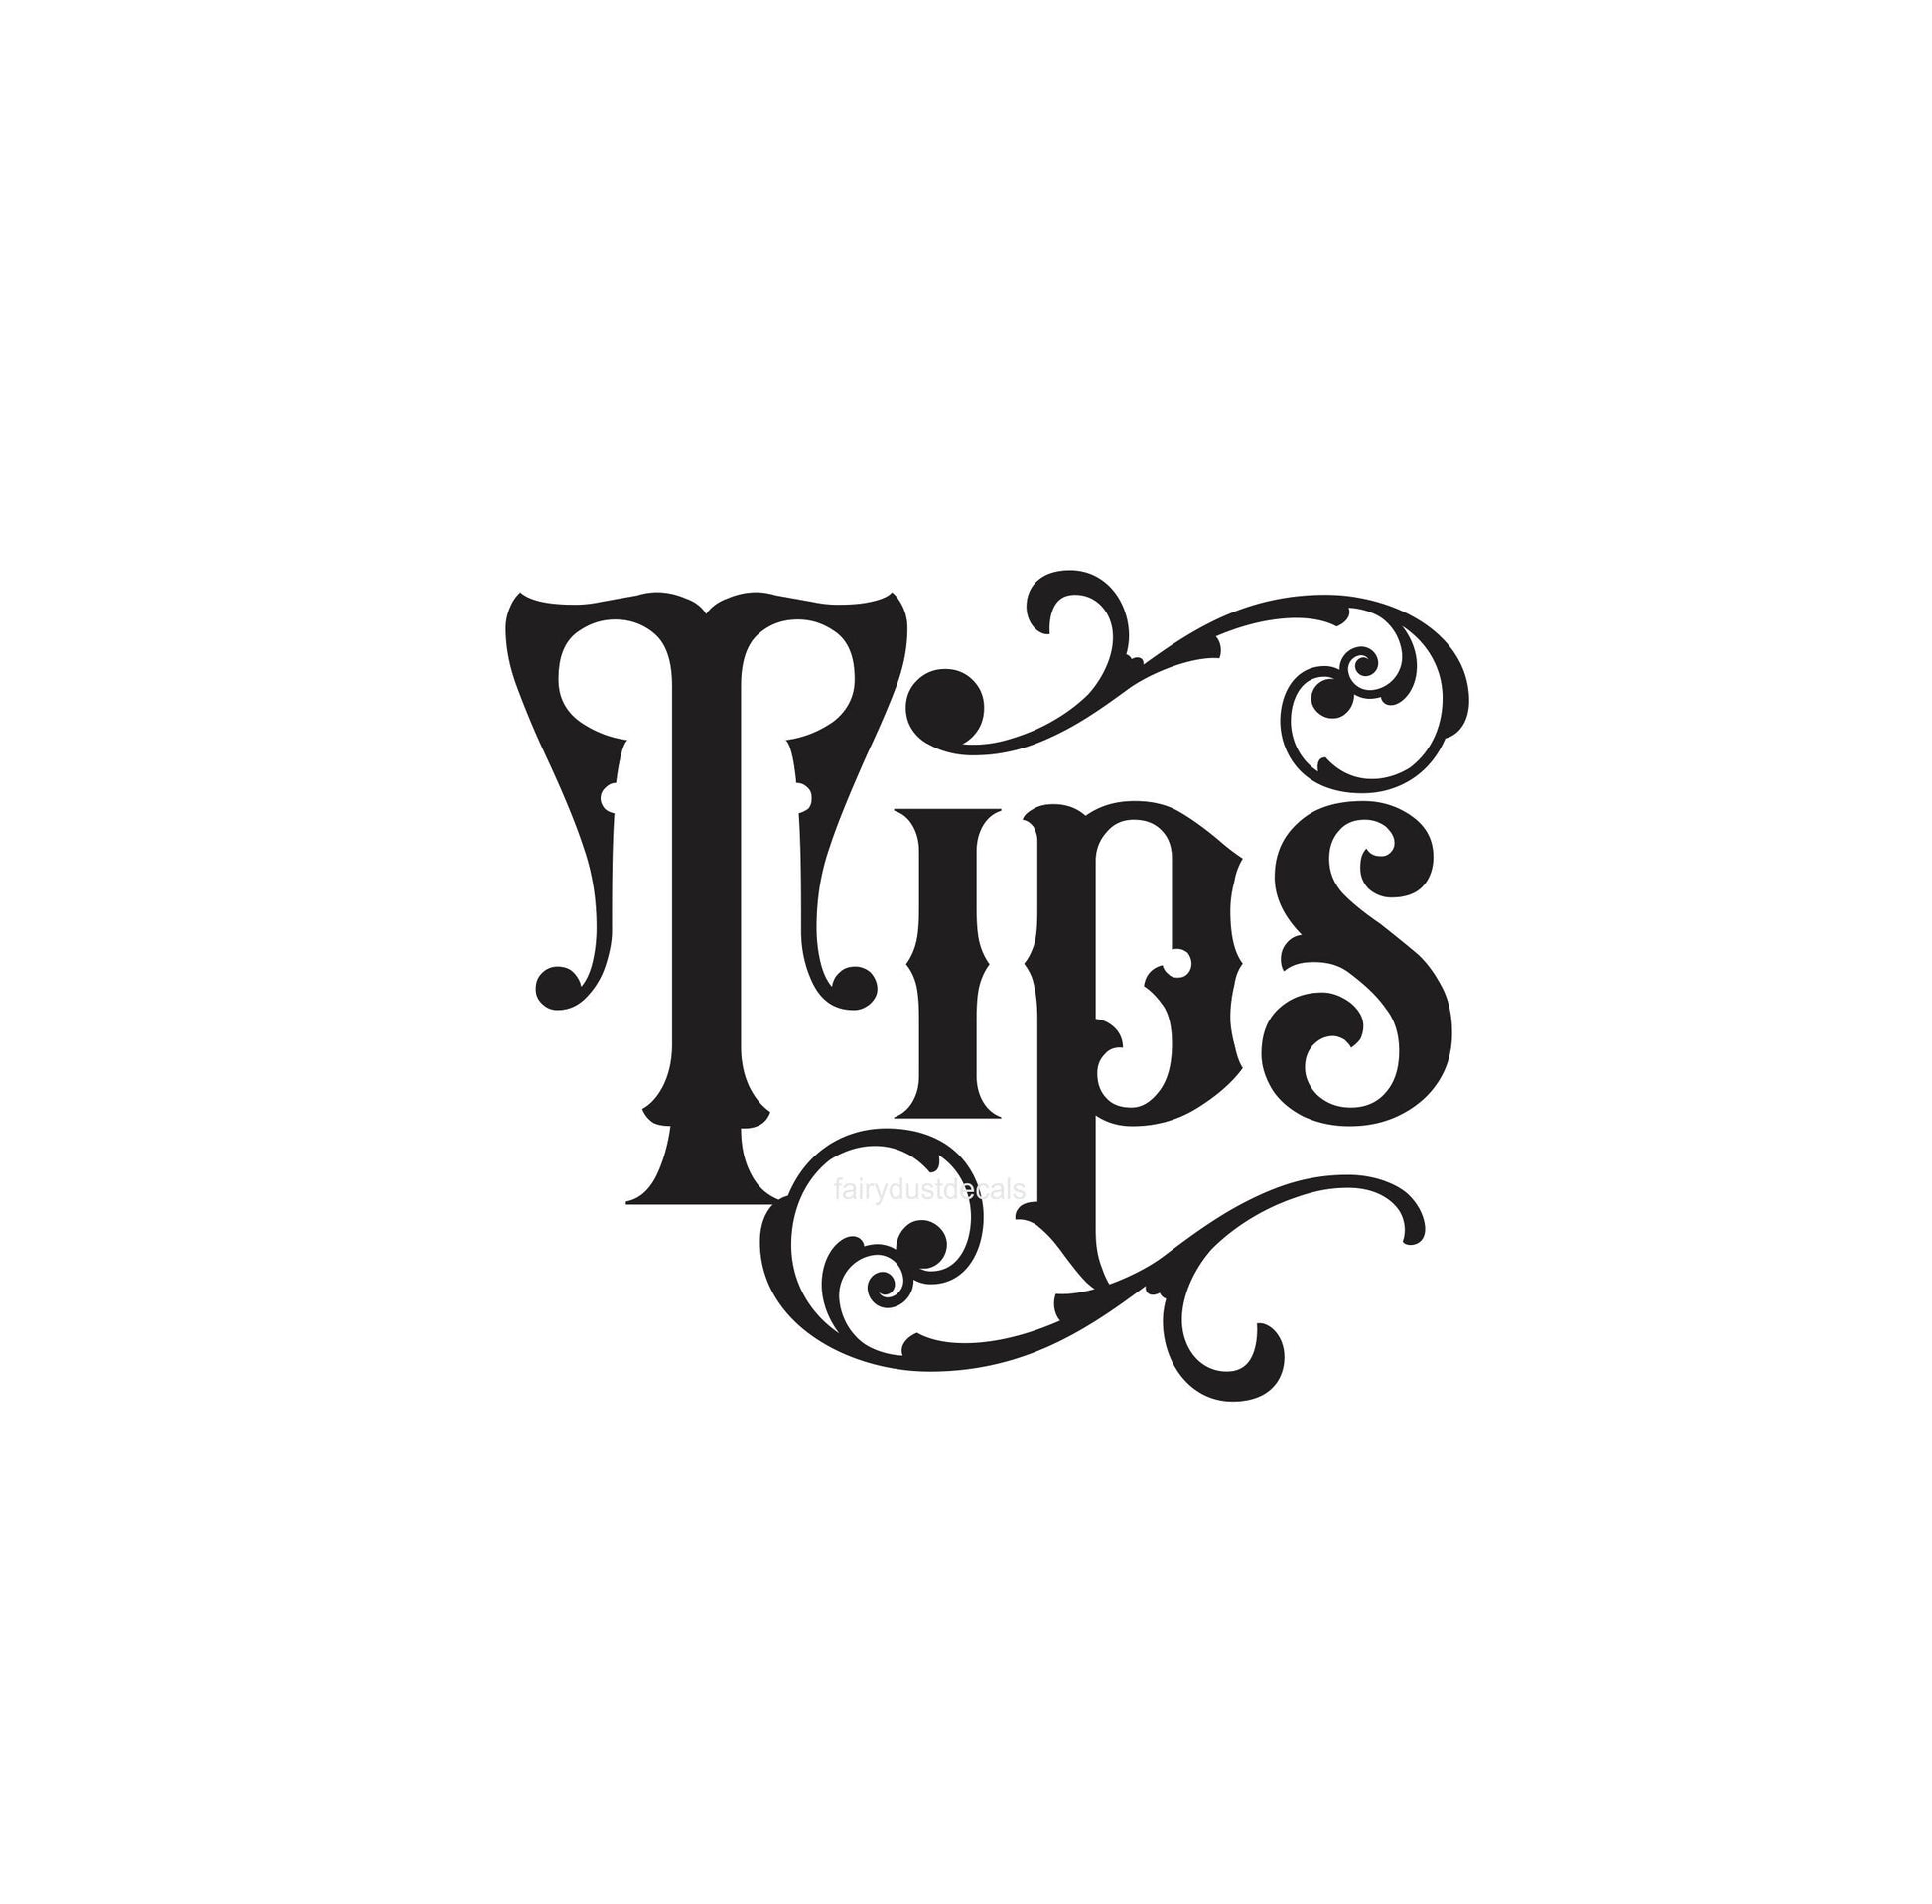 Tips Decal, restaurant gratuities vinyl decal, waitress stylist bartender gift, old fashioned letter style, DECAL ONLY